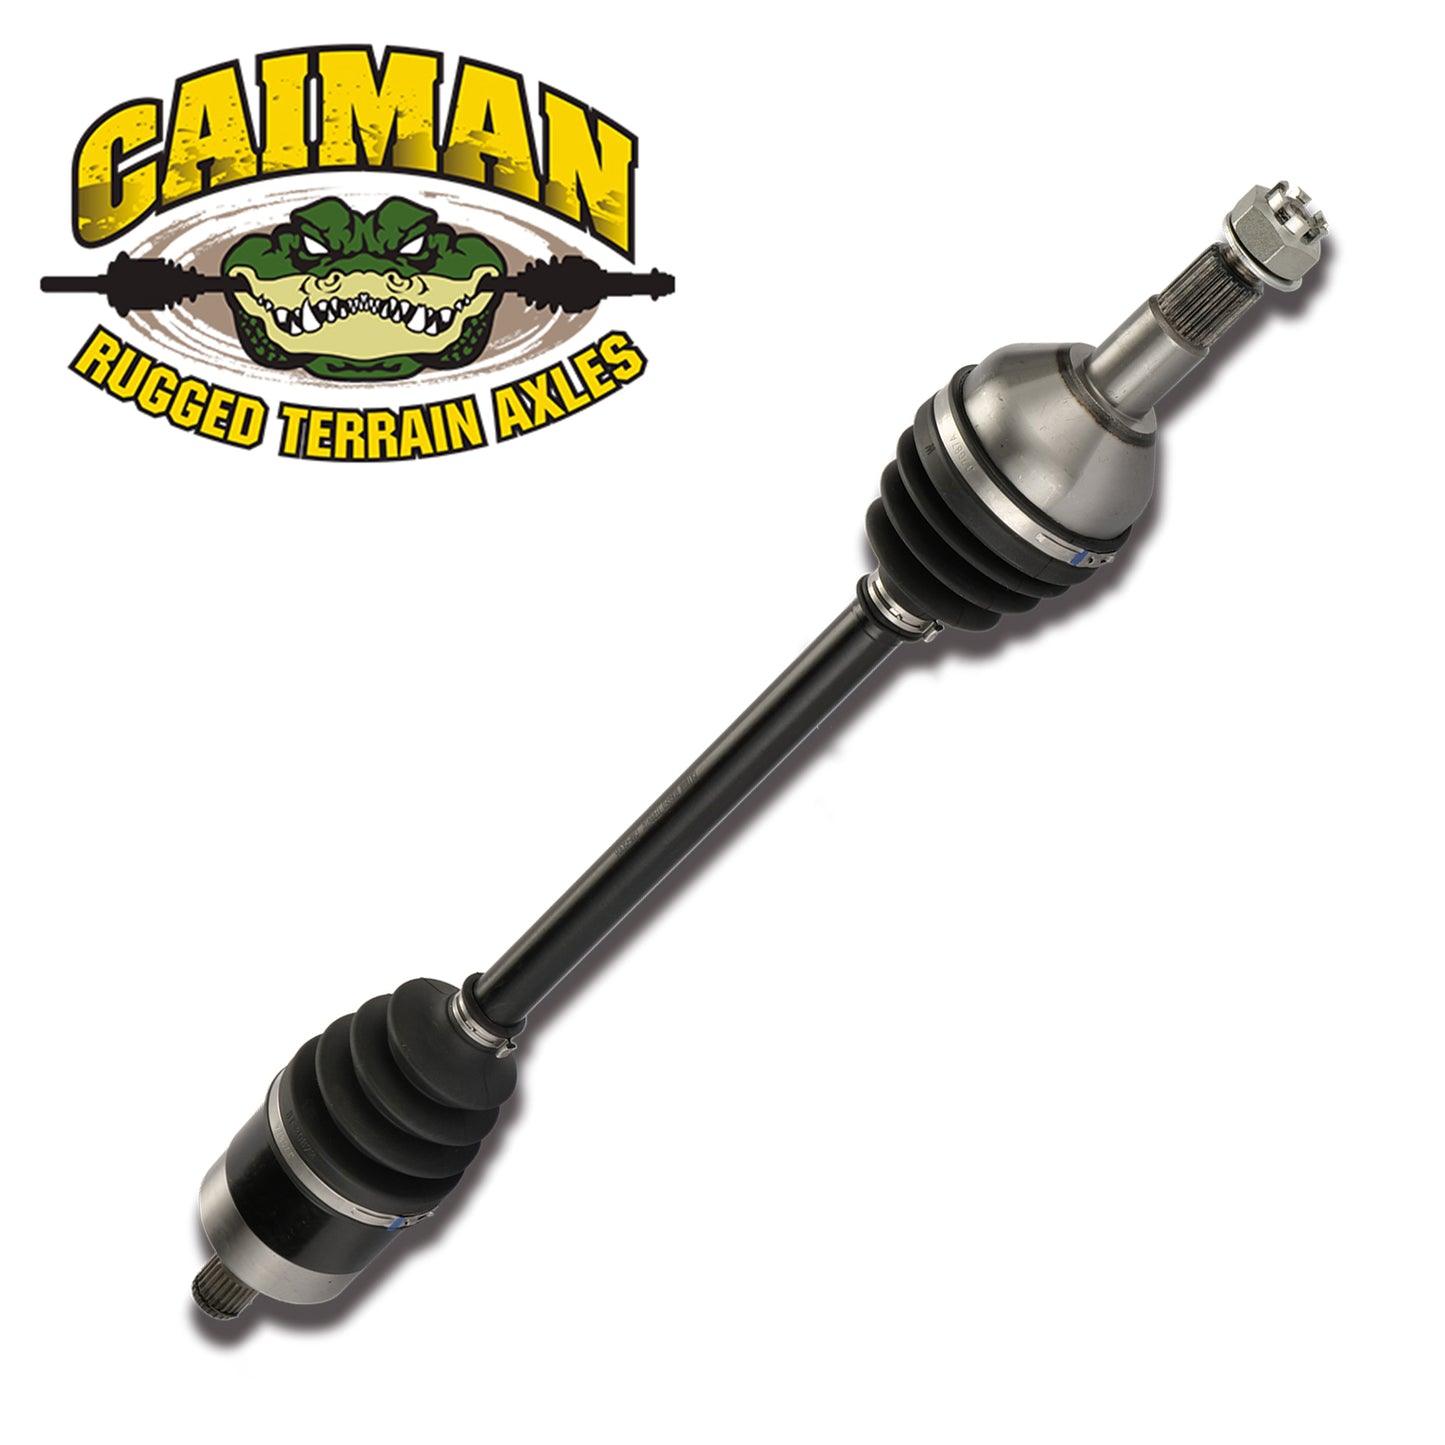 CAM-PO719T Rear Left/Right Heavy Duty Axle (2014-20) Polaris RZR 1000/Turbo/RS1, Made of 4340 Chromoly Steel, In Dual Heat Treated Strength, Gives Wider Angles